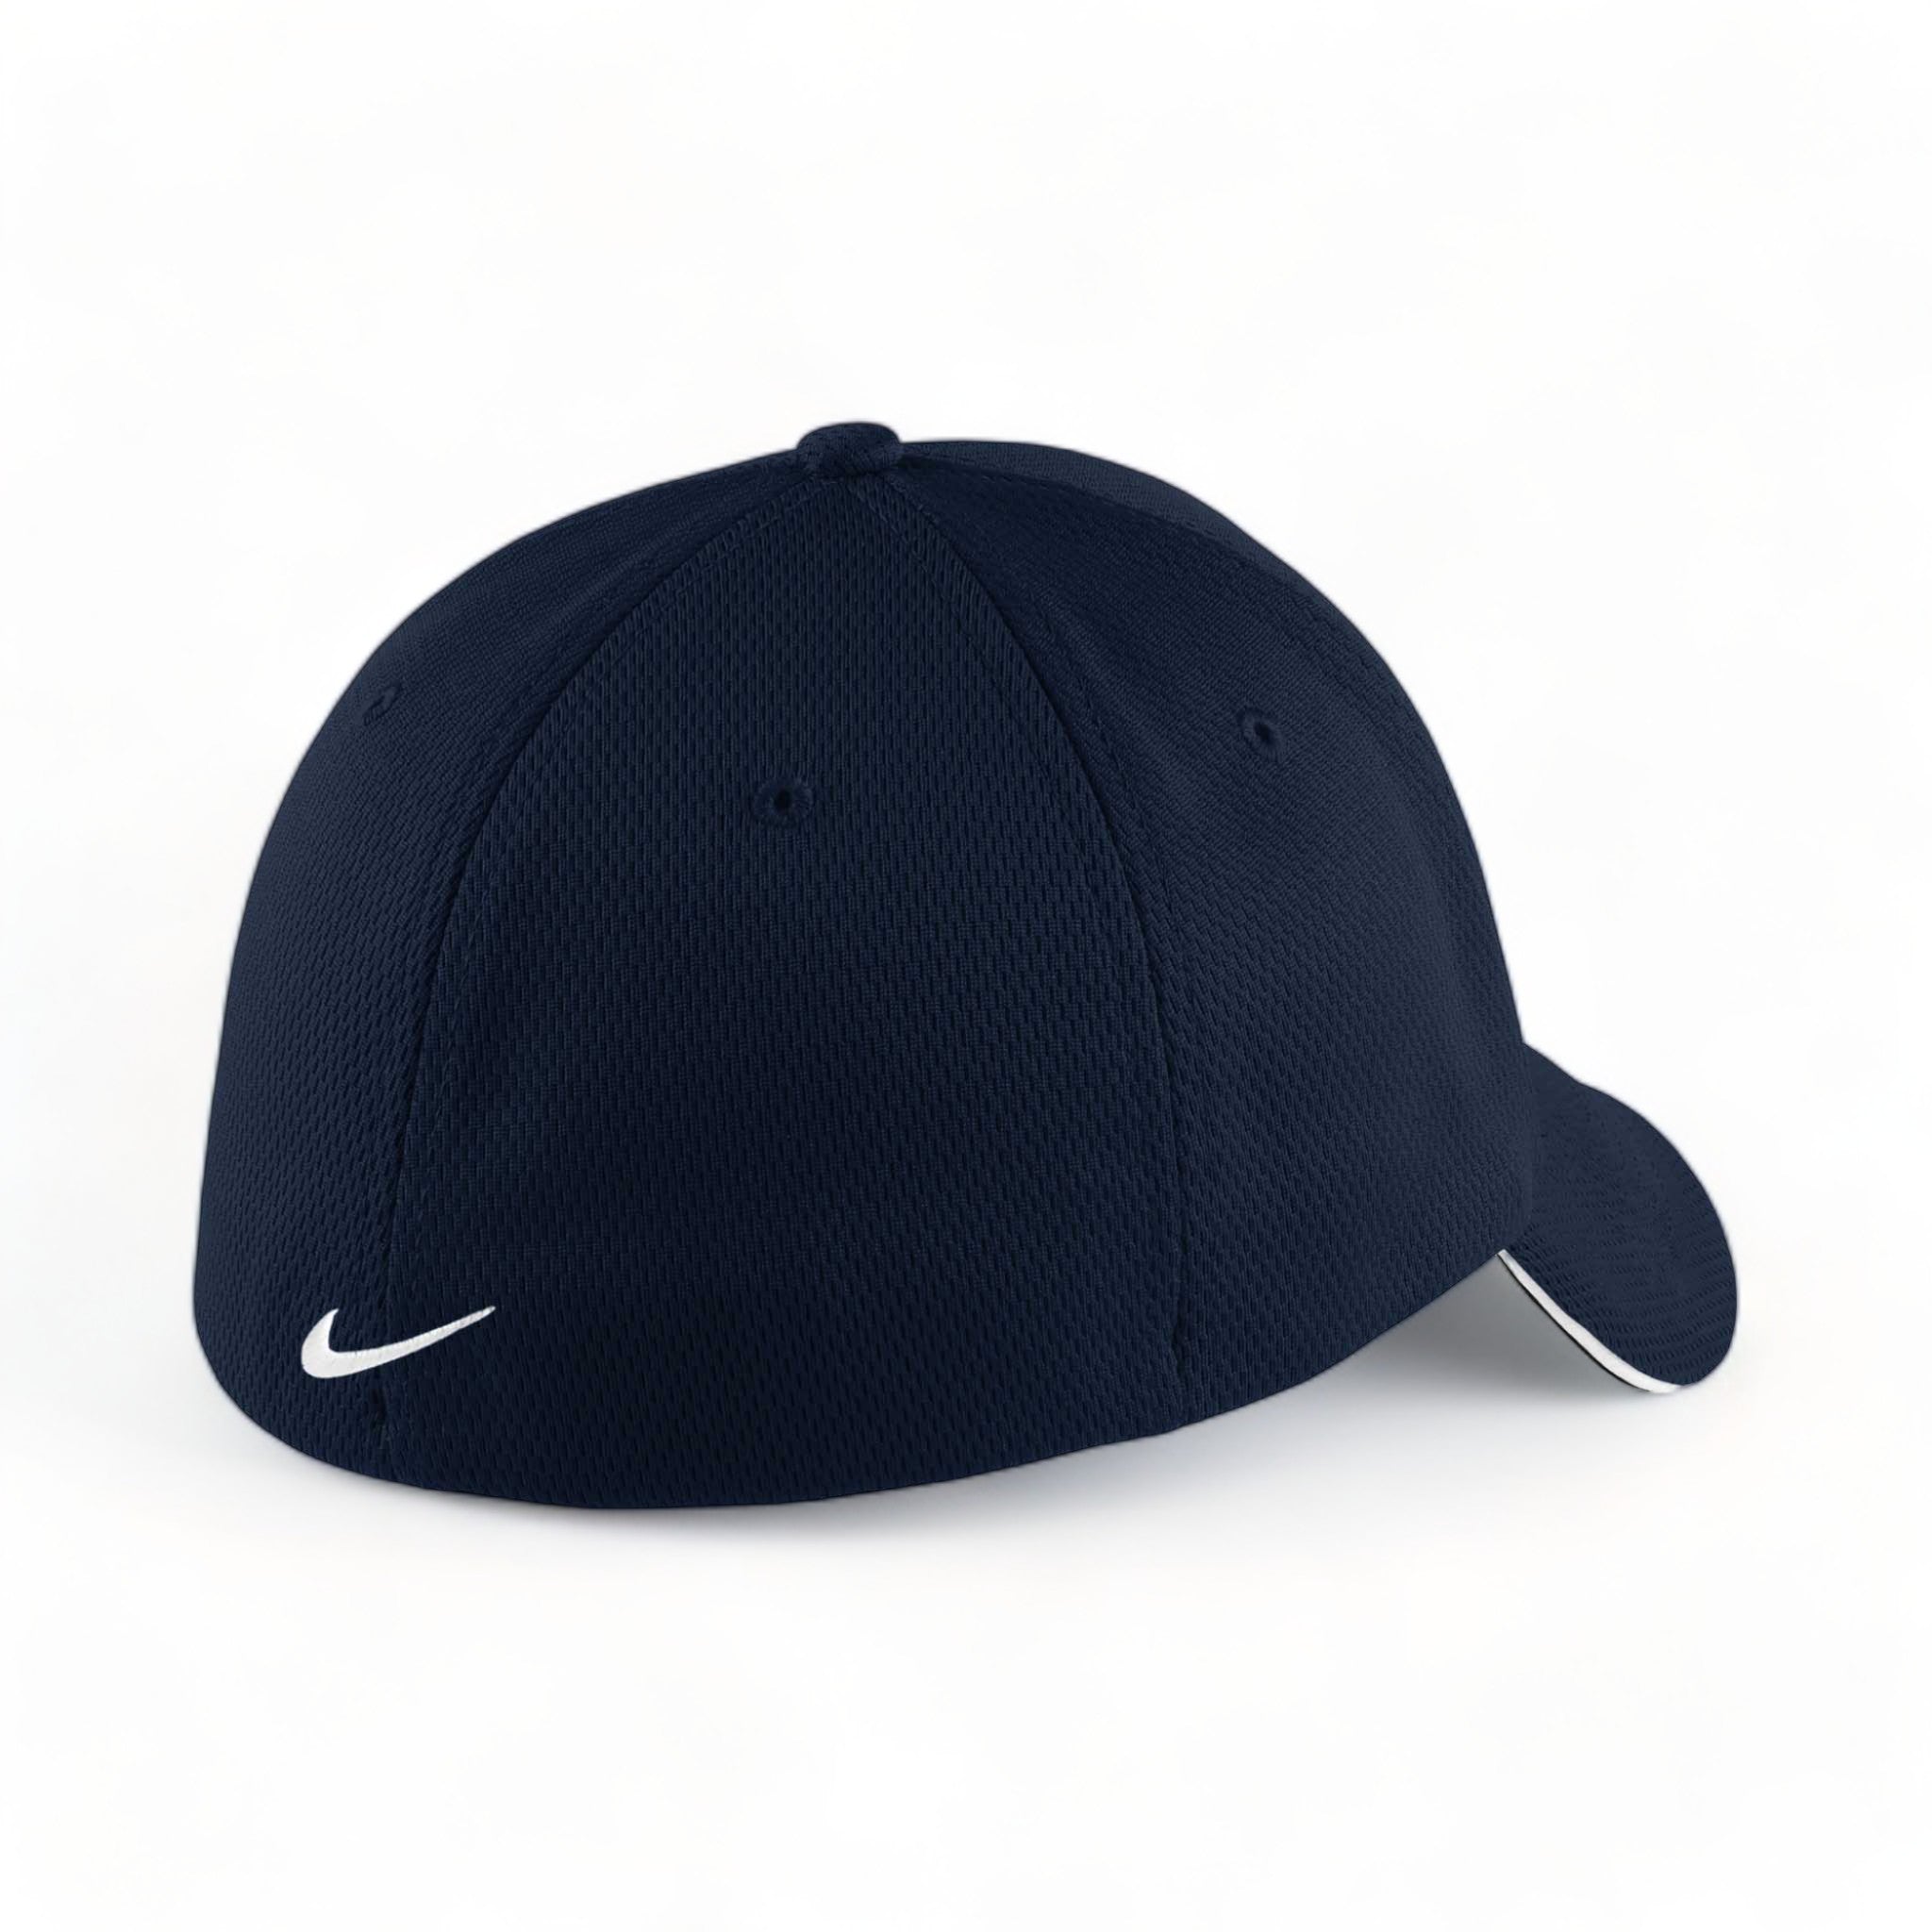 Back view of Nike NKFD9718 custom hat in navy and white